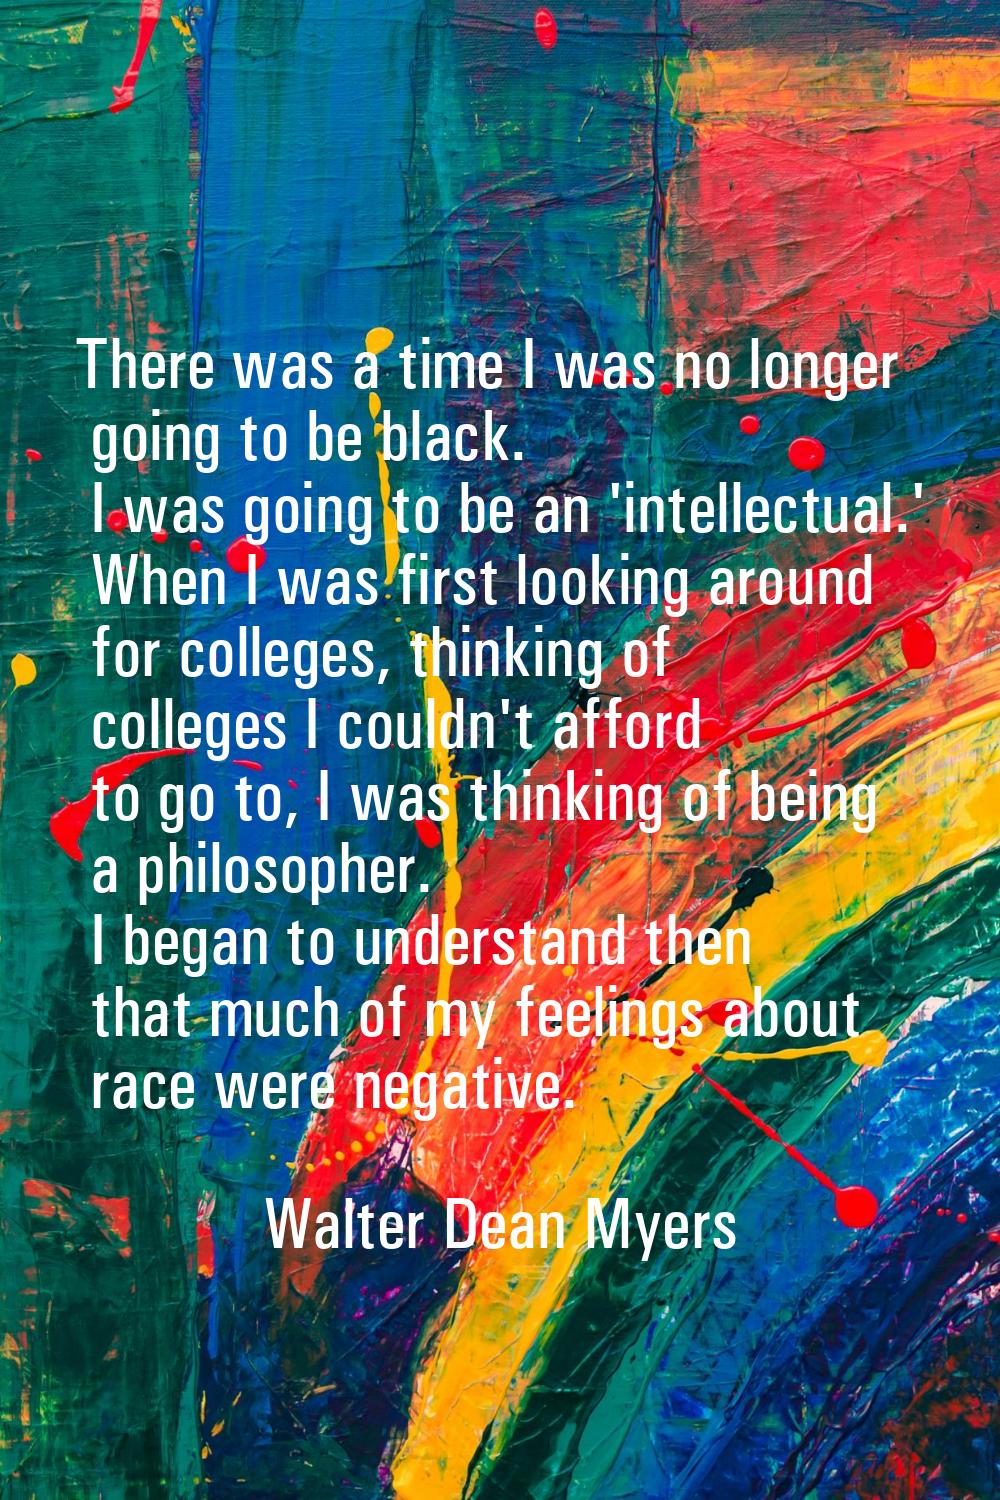 There was a time I was no longer going to be black. I was going to be an 'intellectual.' When I was